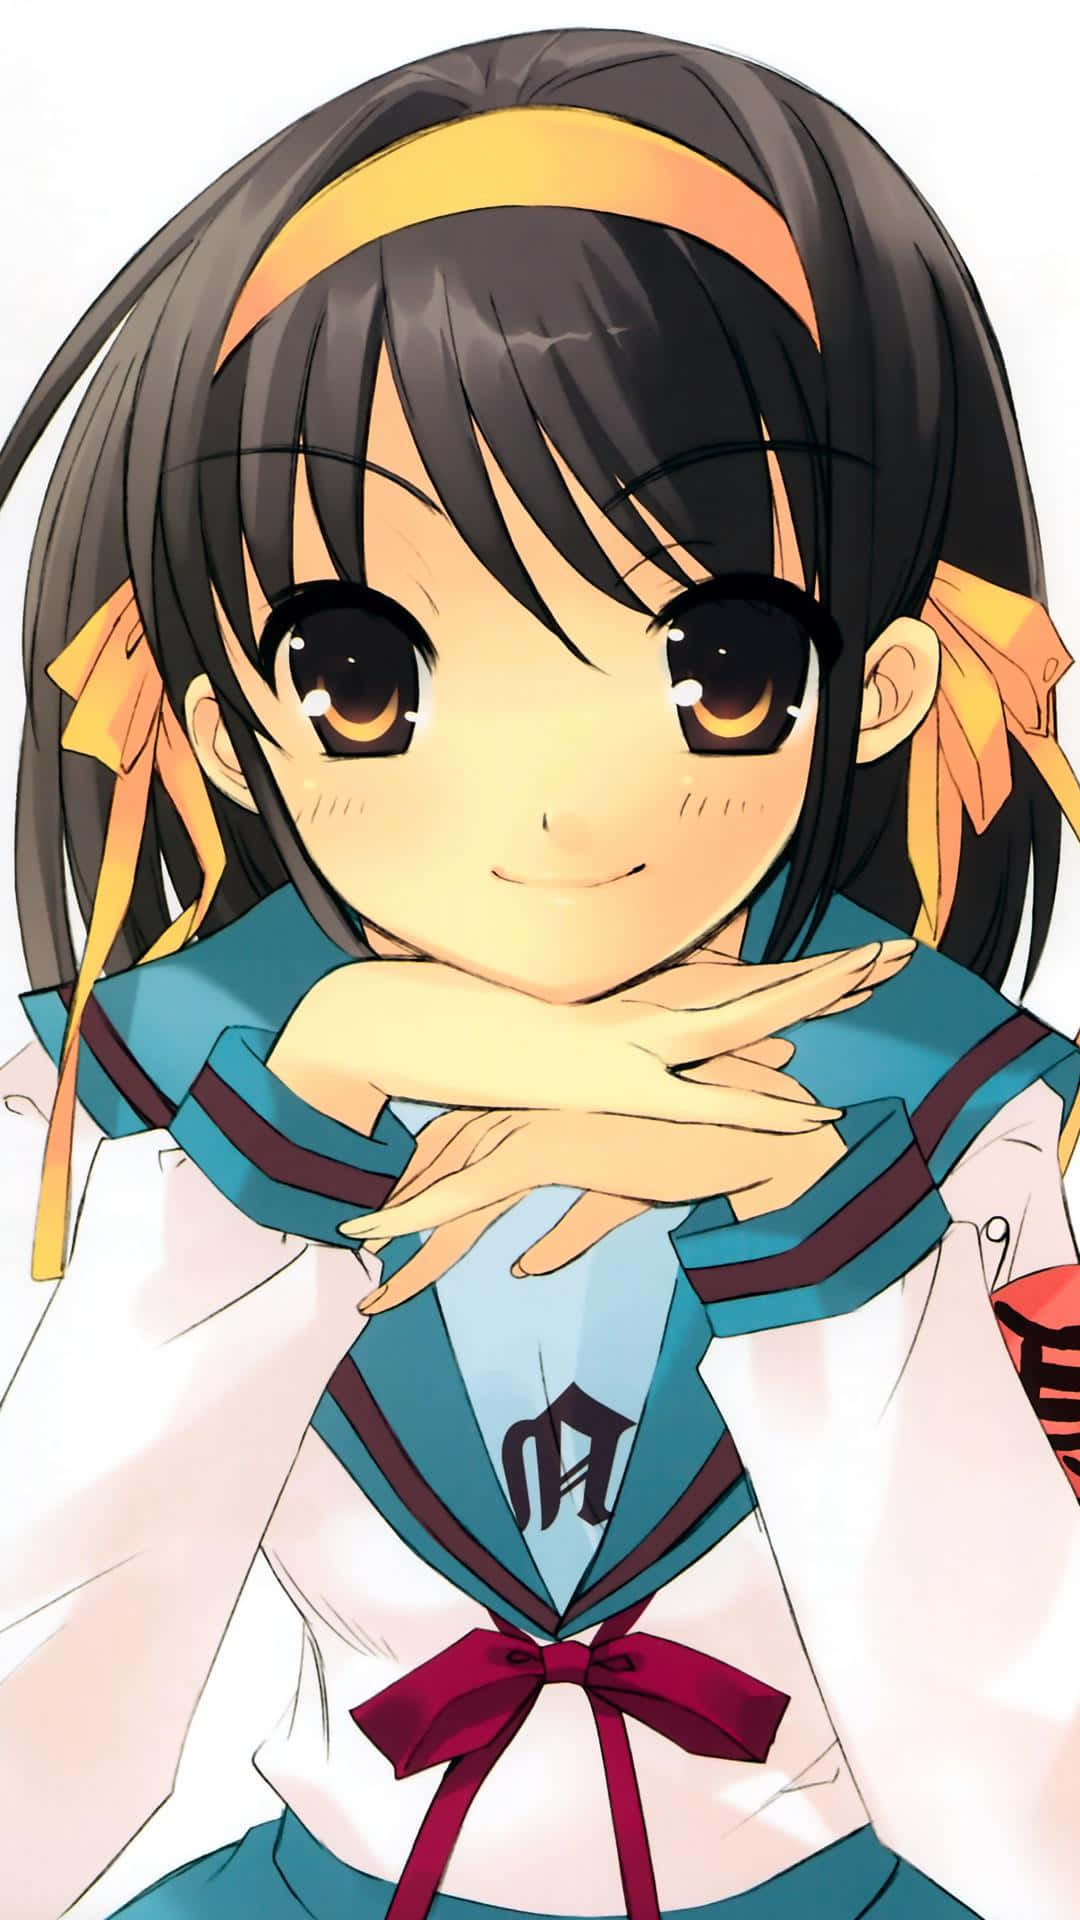 Haruhi Suzumiya striking a confident pose on a colorful background Wallpaper